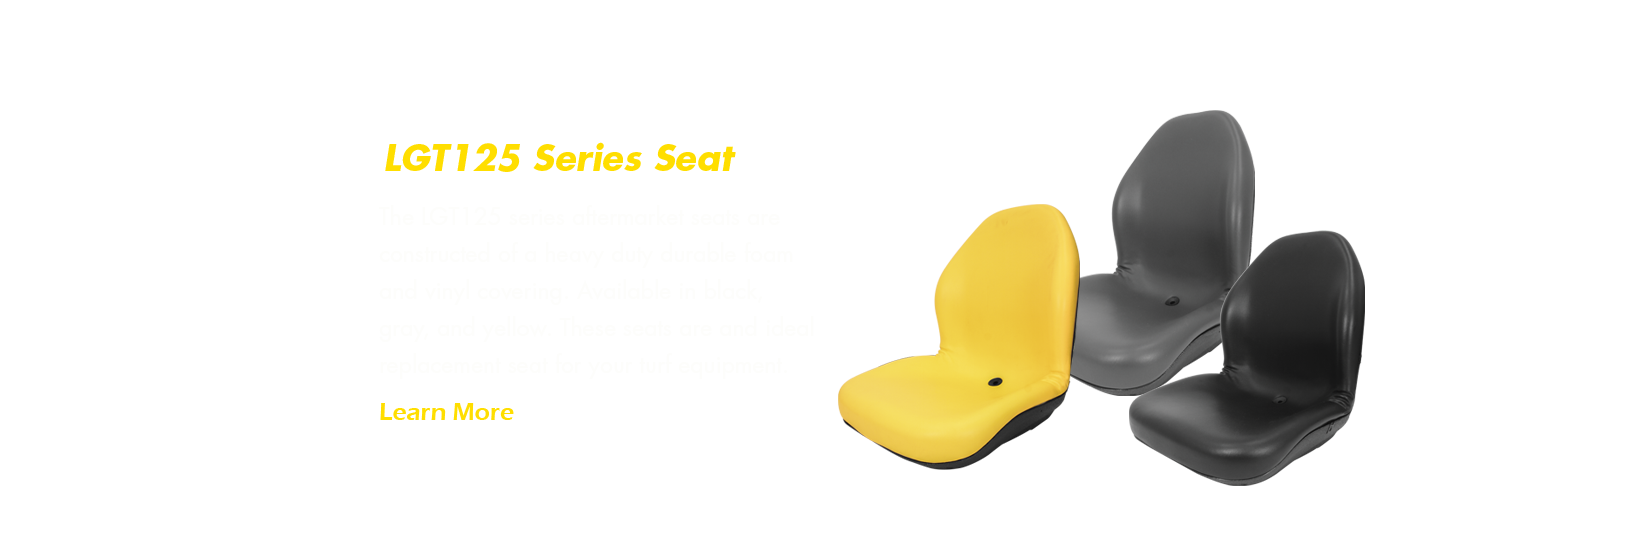 Learn more about LGT125 Series Seats